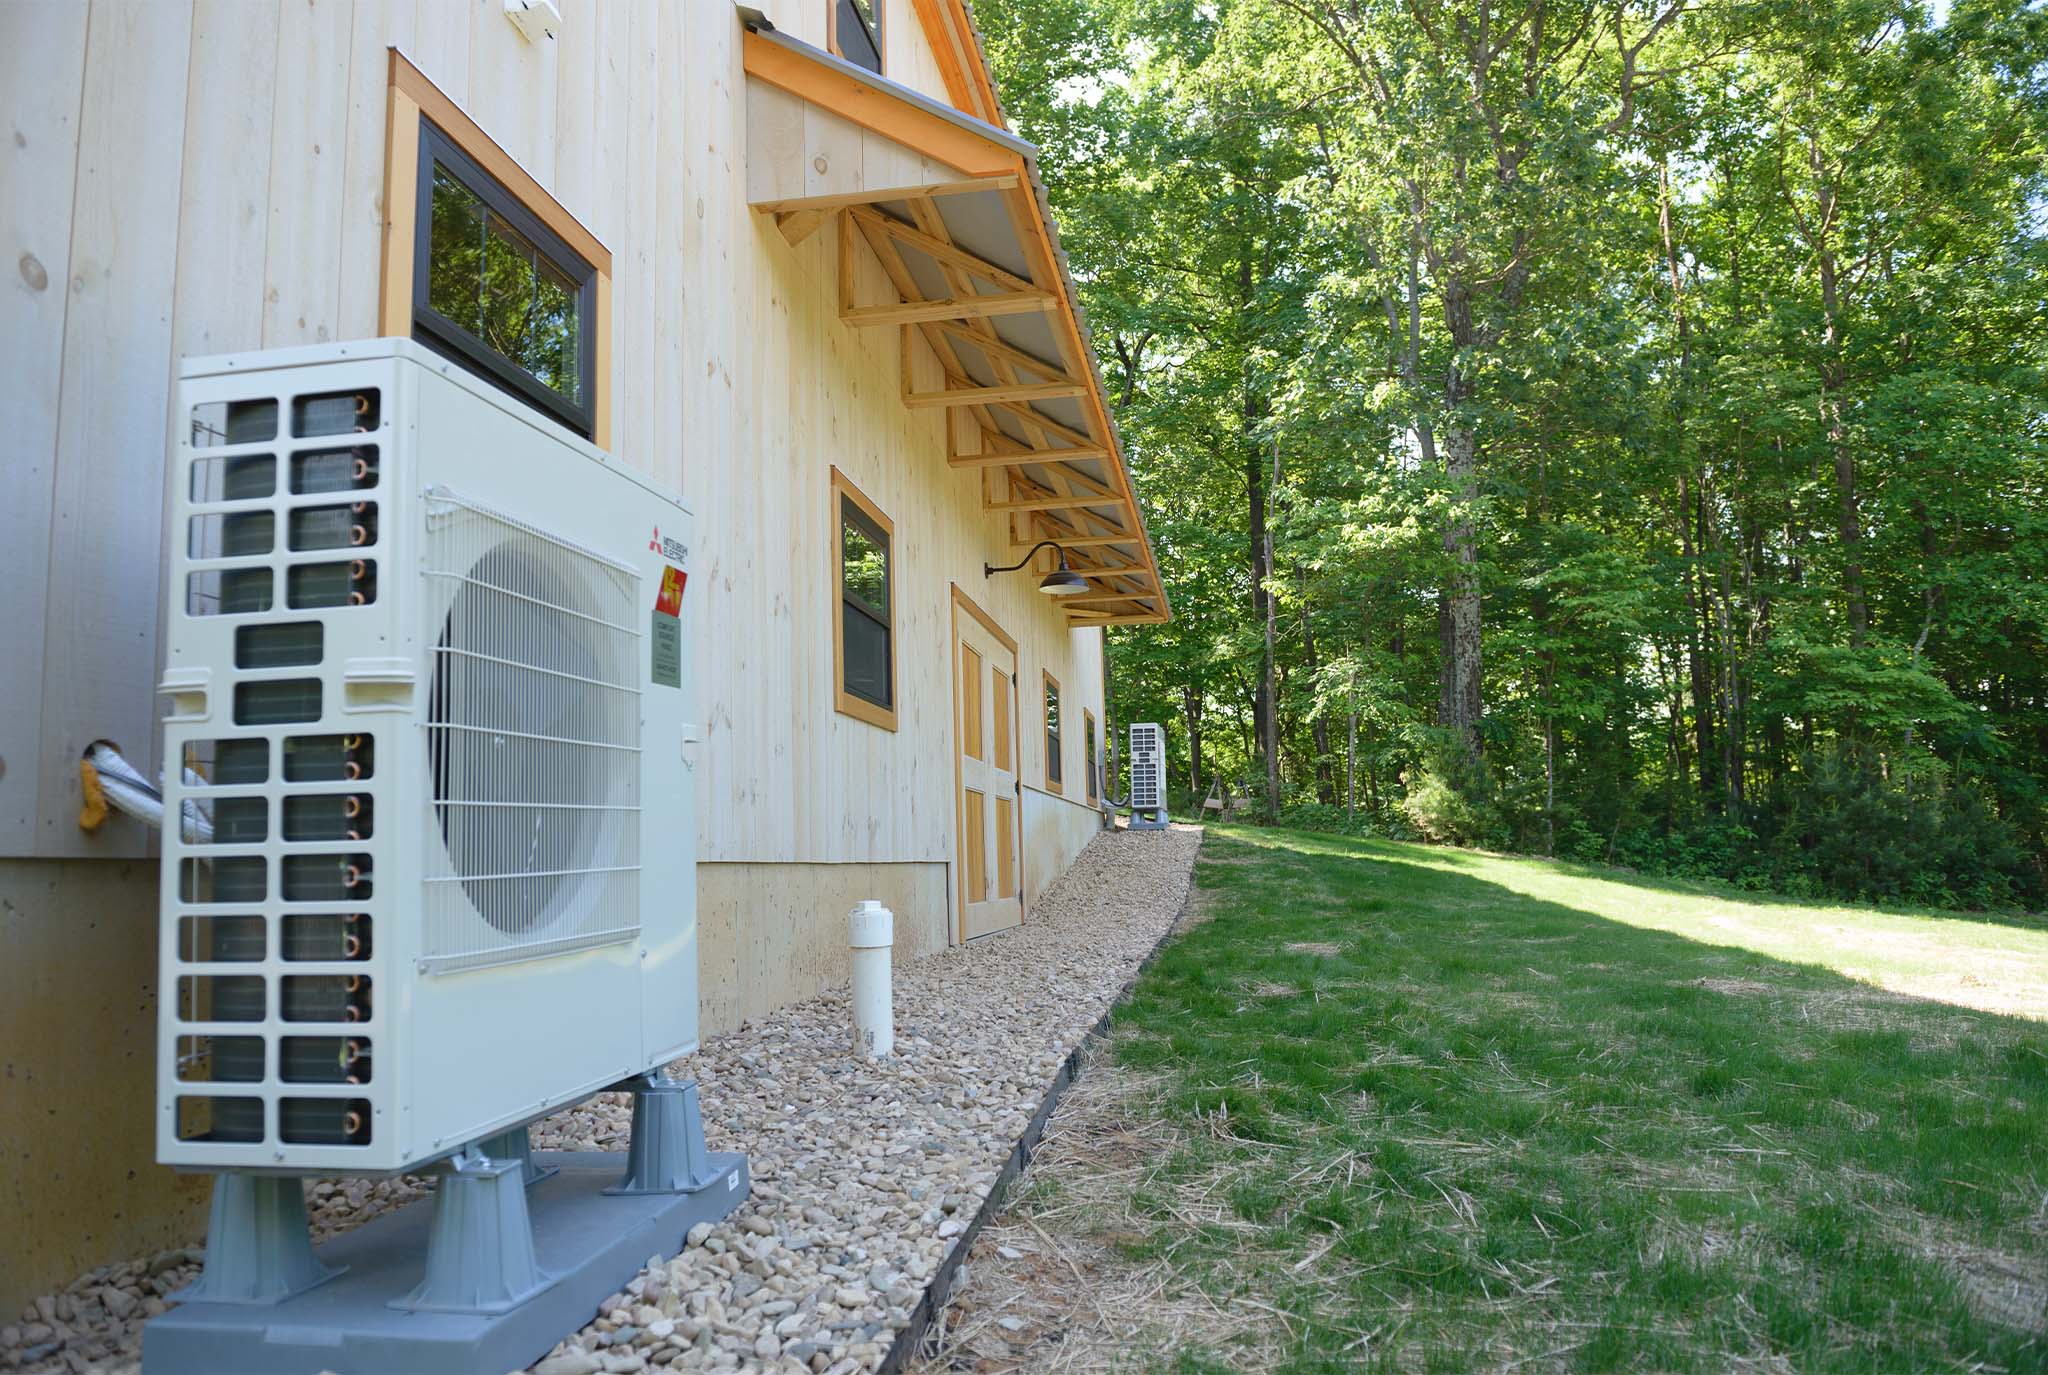 An exterior picture of a fine furniture maker's workshop showing Mitsubishi high-efficiency heat pumps.